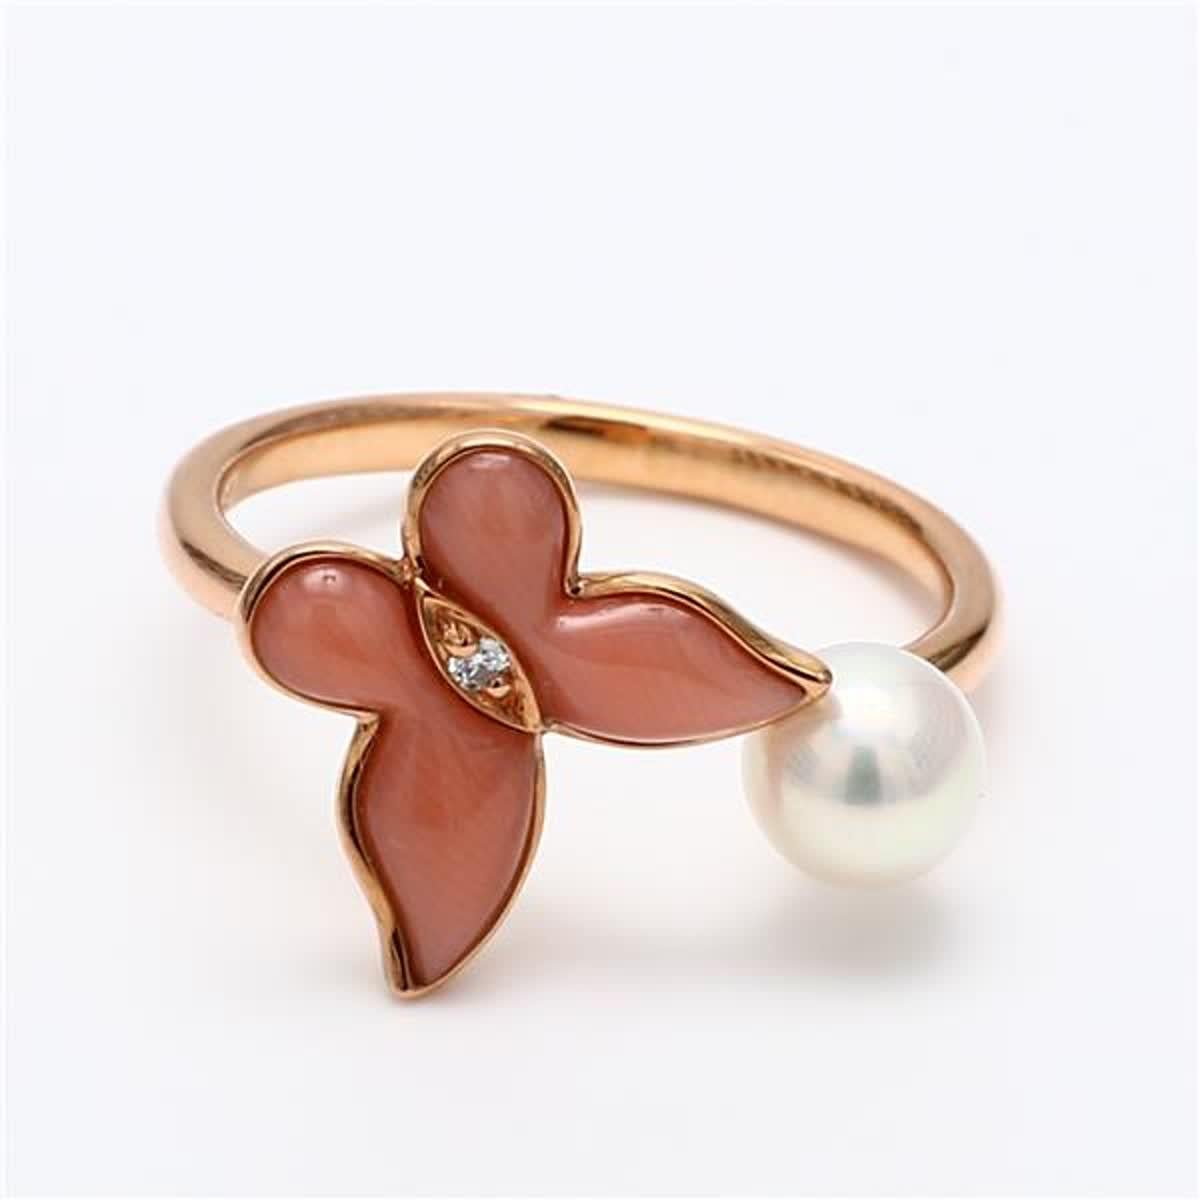 RareGemWorld's classic fashion ring. Mounted in a beautiful 18K Rose Gold setting with a natural white pearl, pink corralium secundum, and a natural round white diamond. This ring is guaranteed to impress and enhance your personal collection!

Total